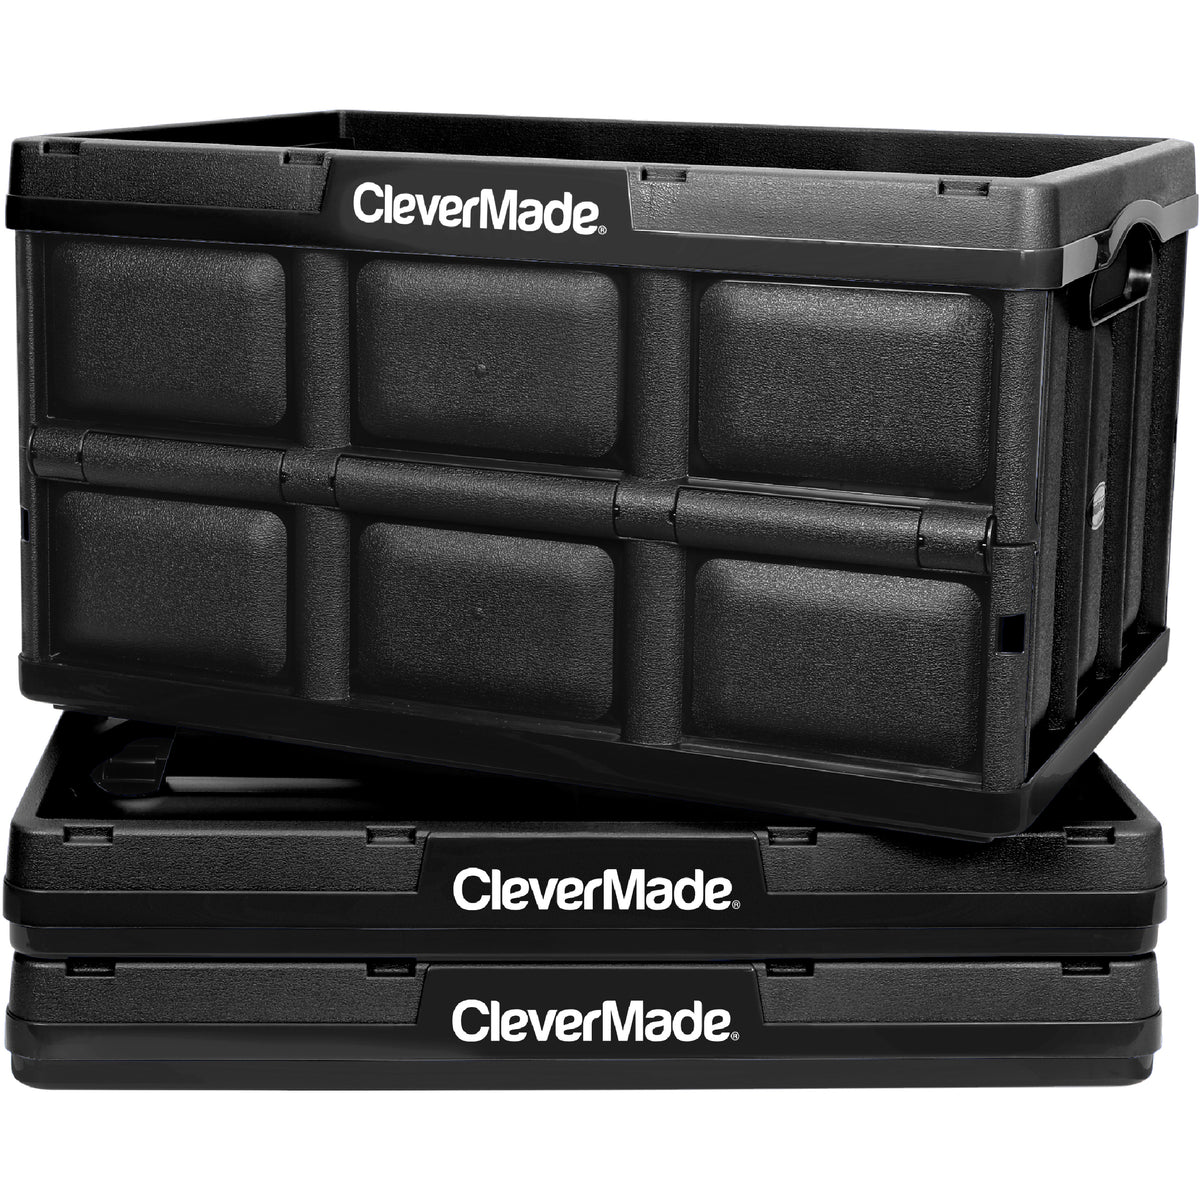 Clevermade CleverCrates Folding Crate, Black, 46 Liter